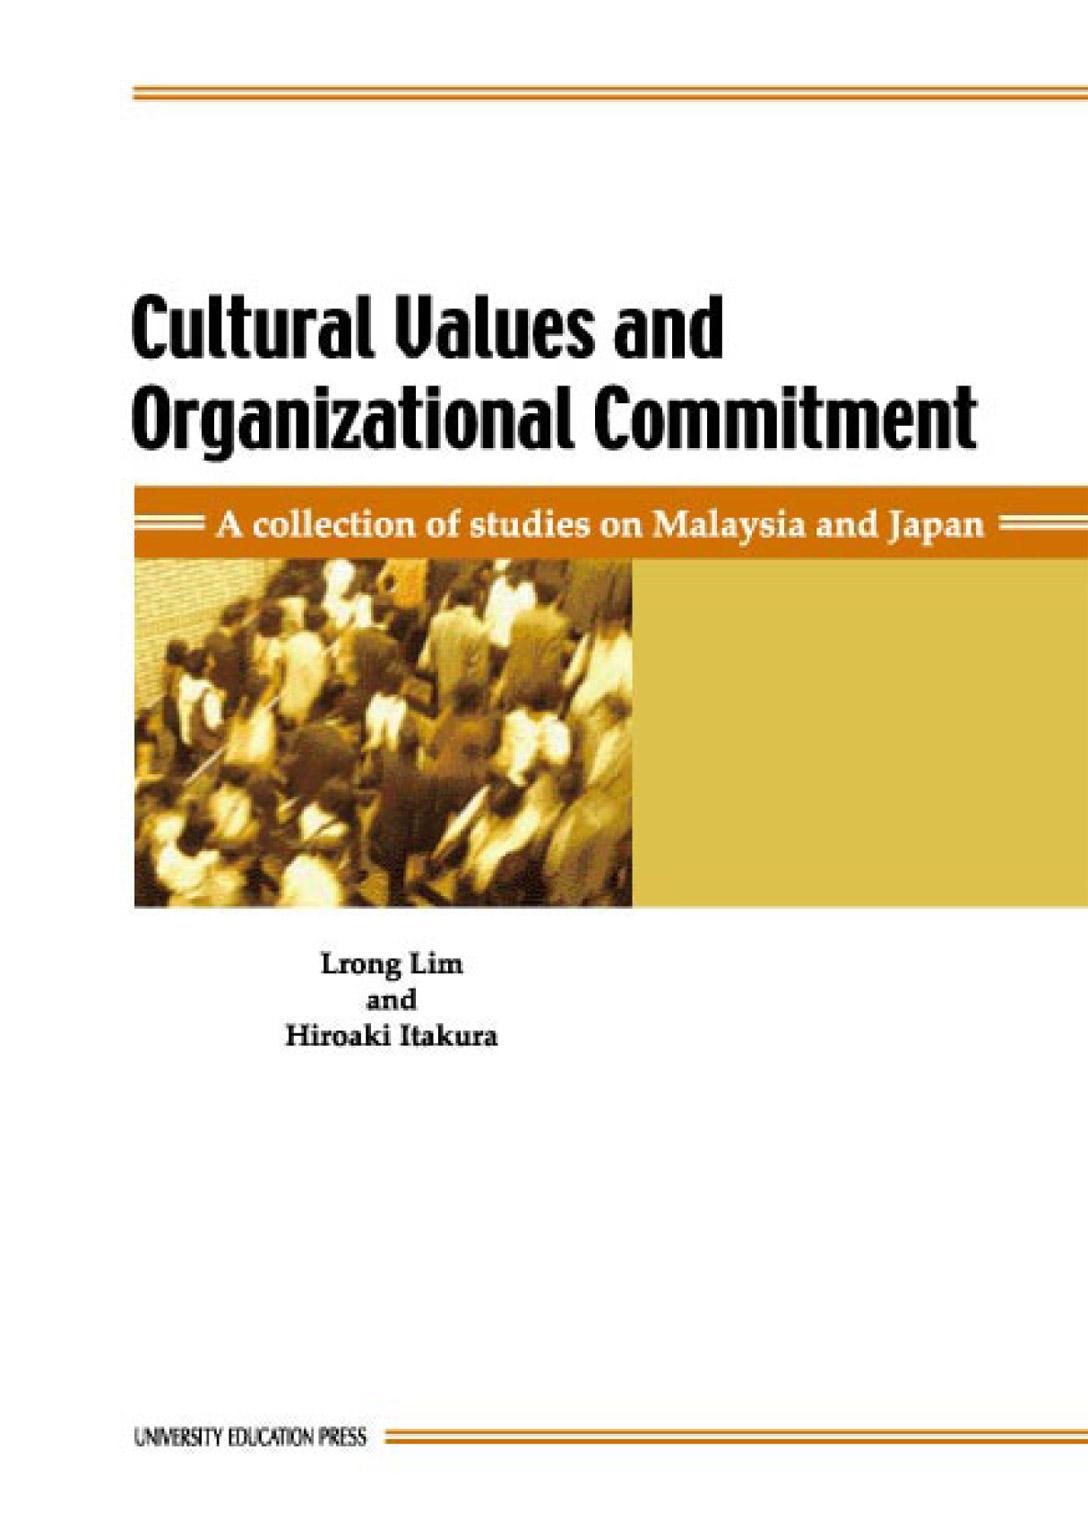 Cultural Values and Organizational Commitment―A collection of studies on Malaysia and Japan―